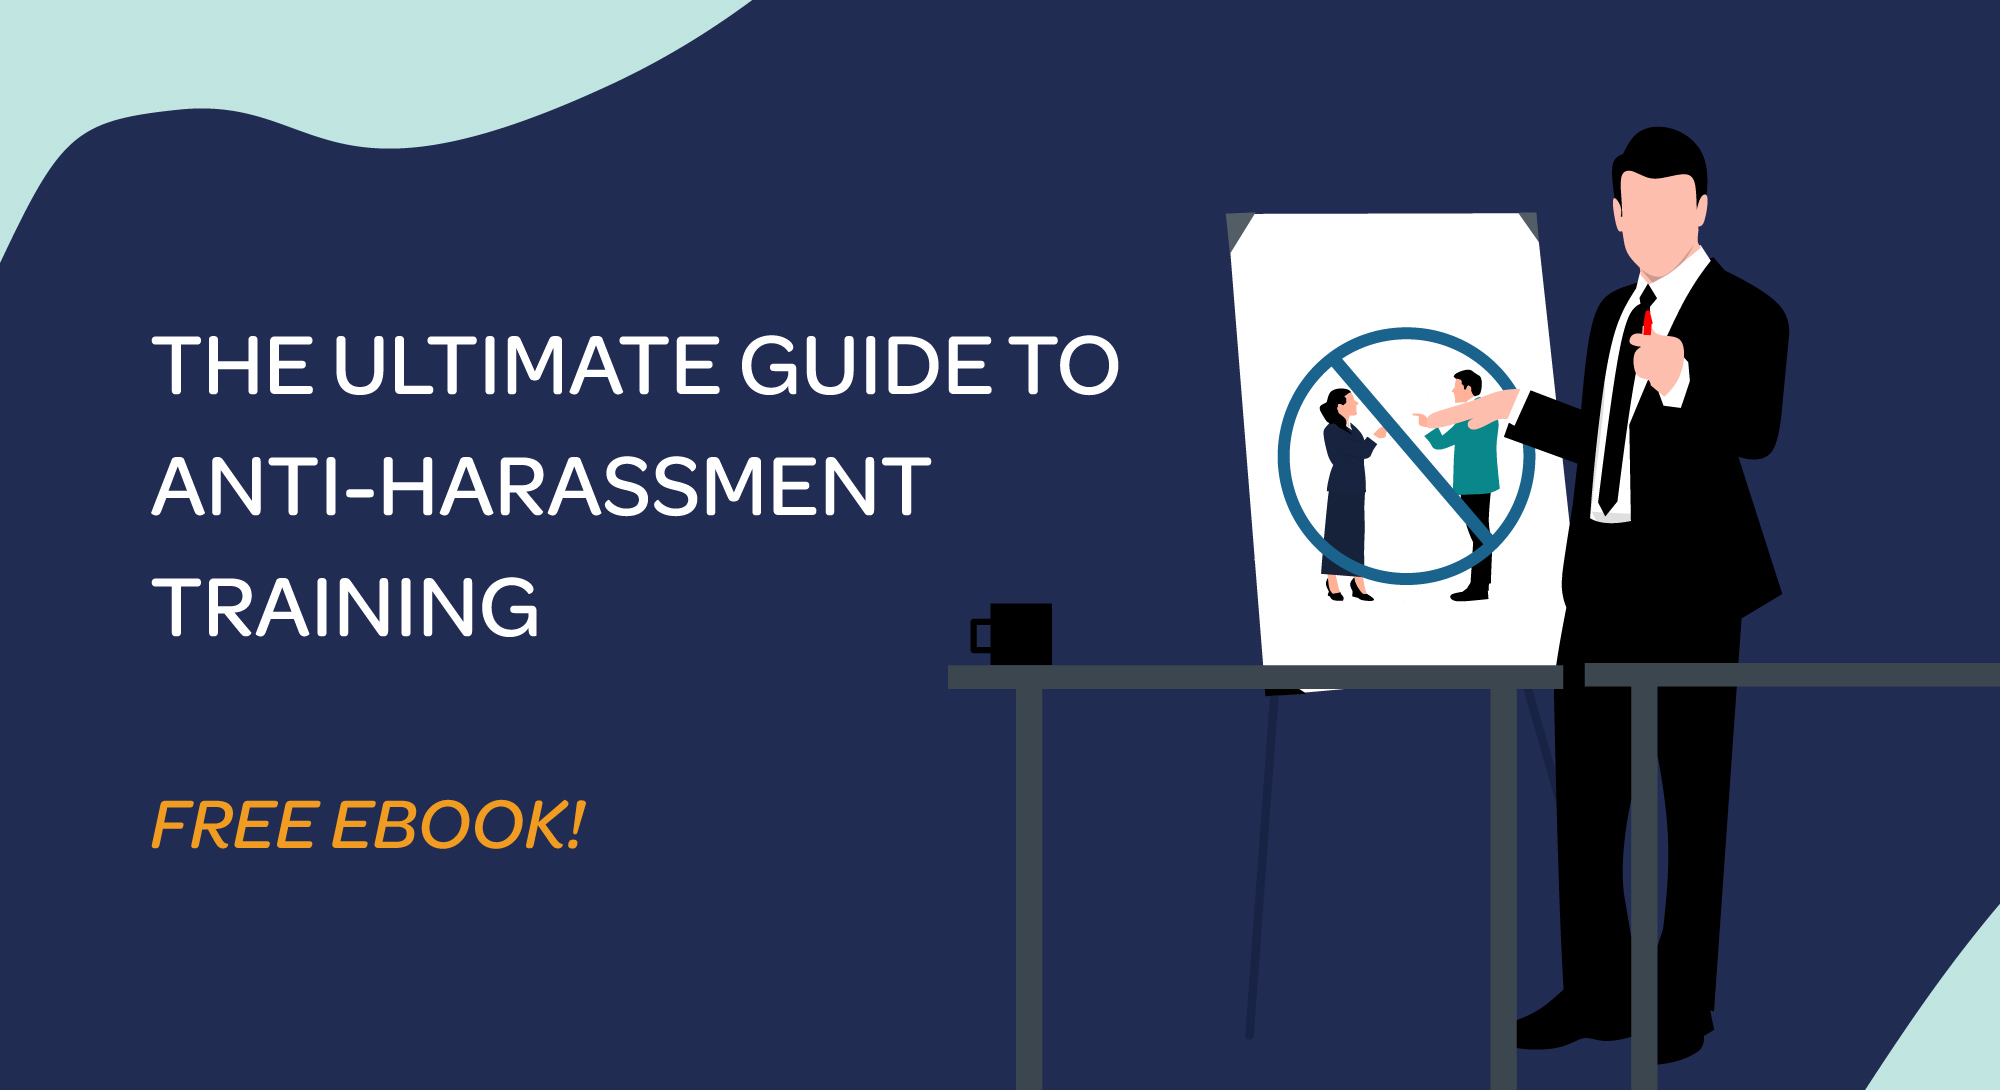 The ultimate guide to anti-harassment training ebook